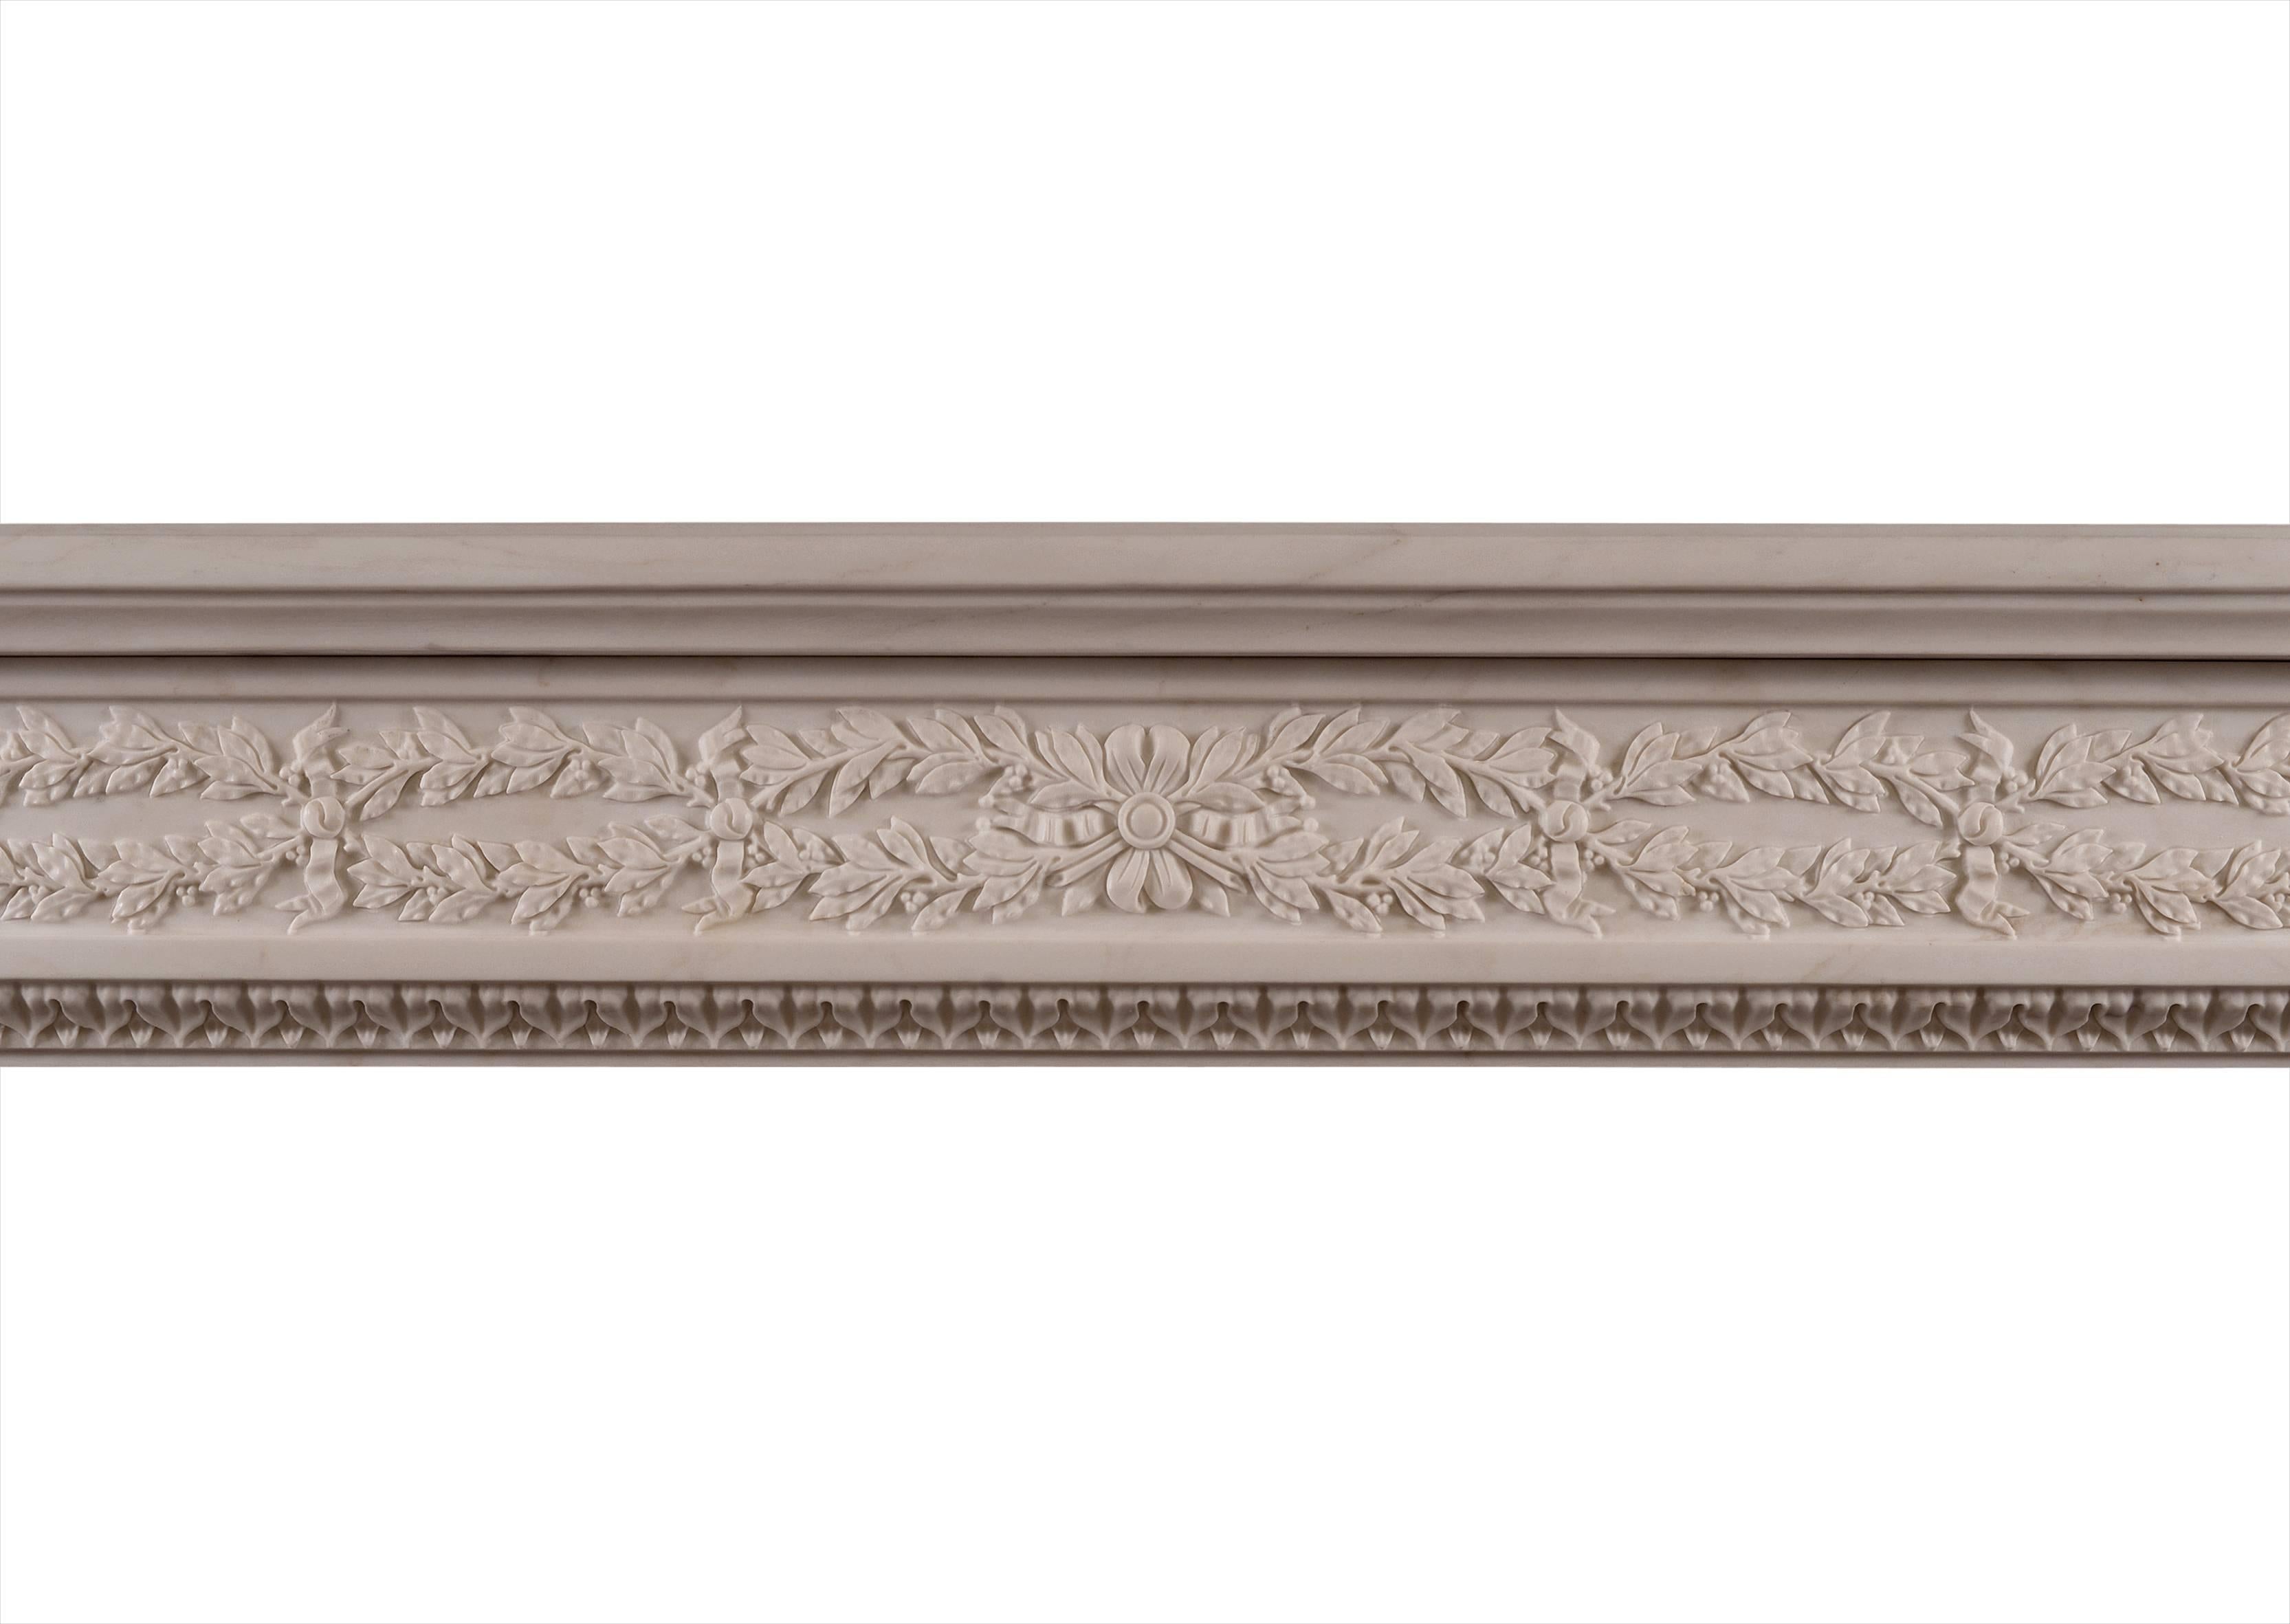 A French Louis XVI style white marble fireplace, with carved frieze of interlocking leaves, berries and ribbons. The jambs with tapered half round columns with flutes and husks surmounted by capitals of stiff leaf form. The inner moulding with